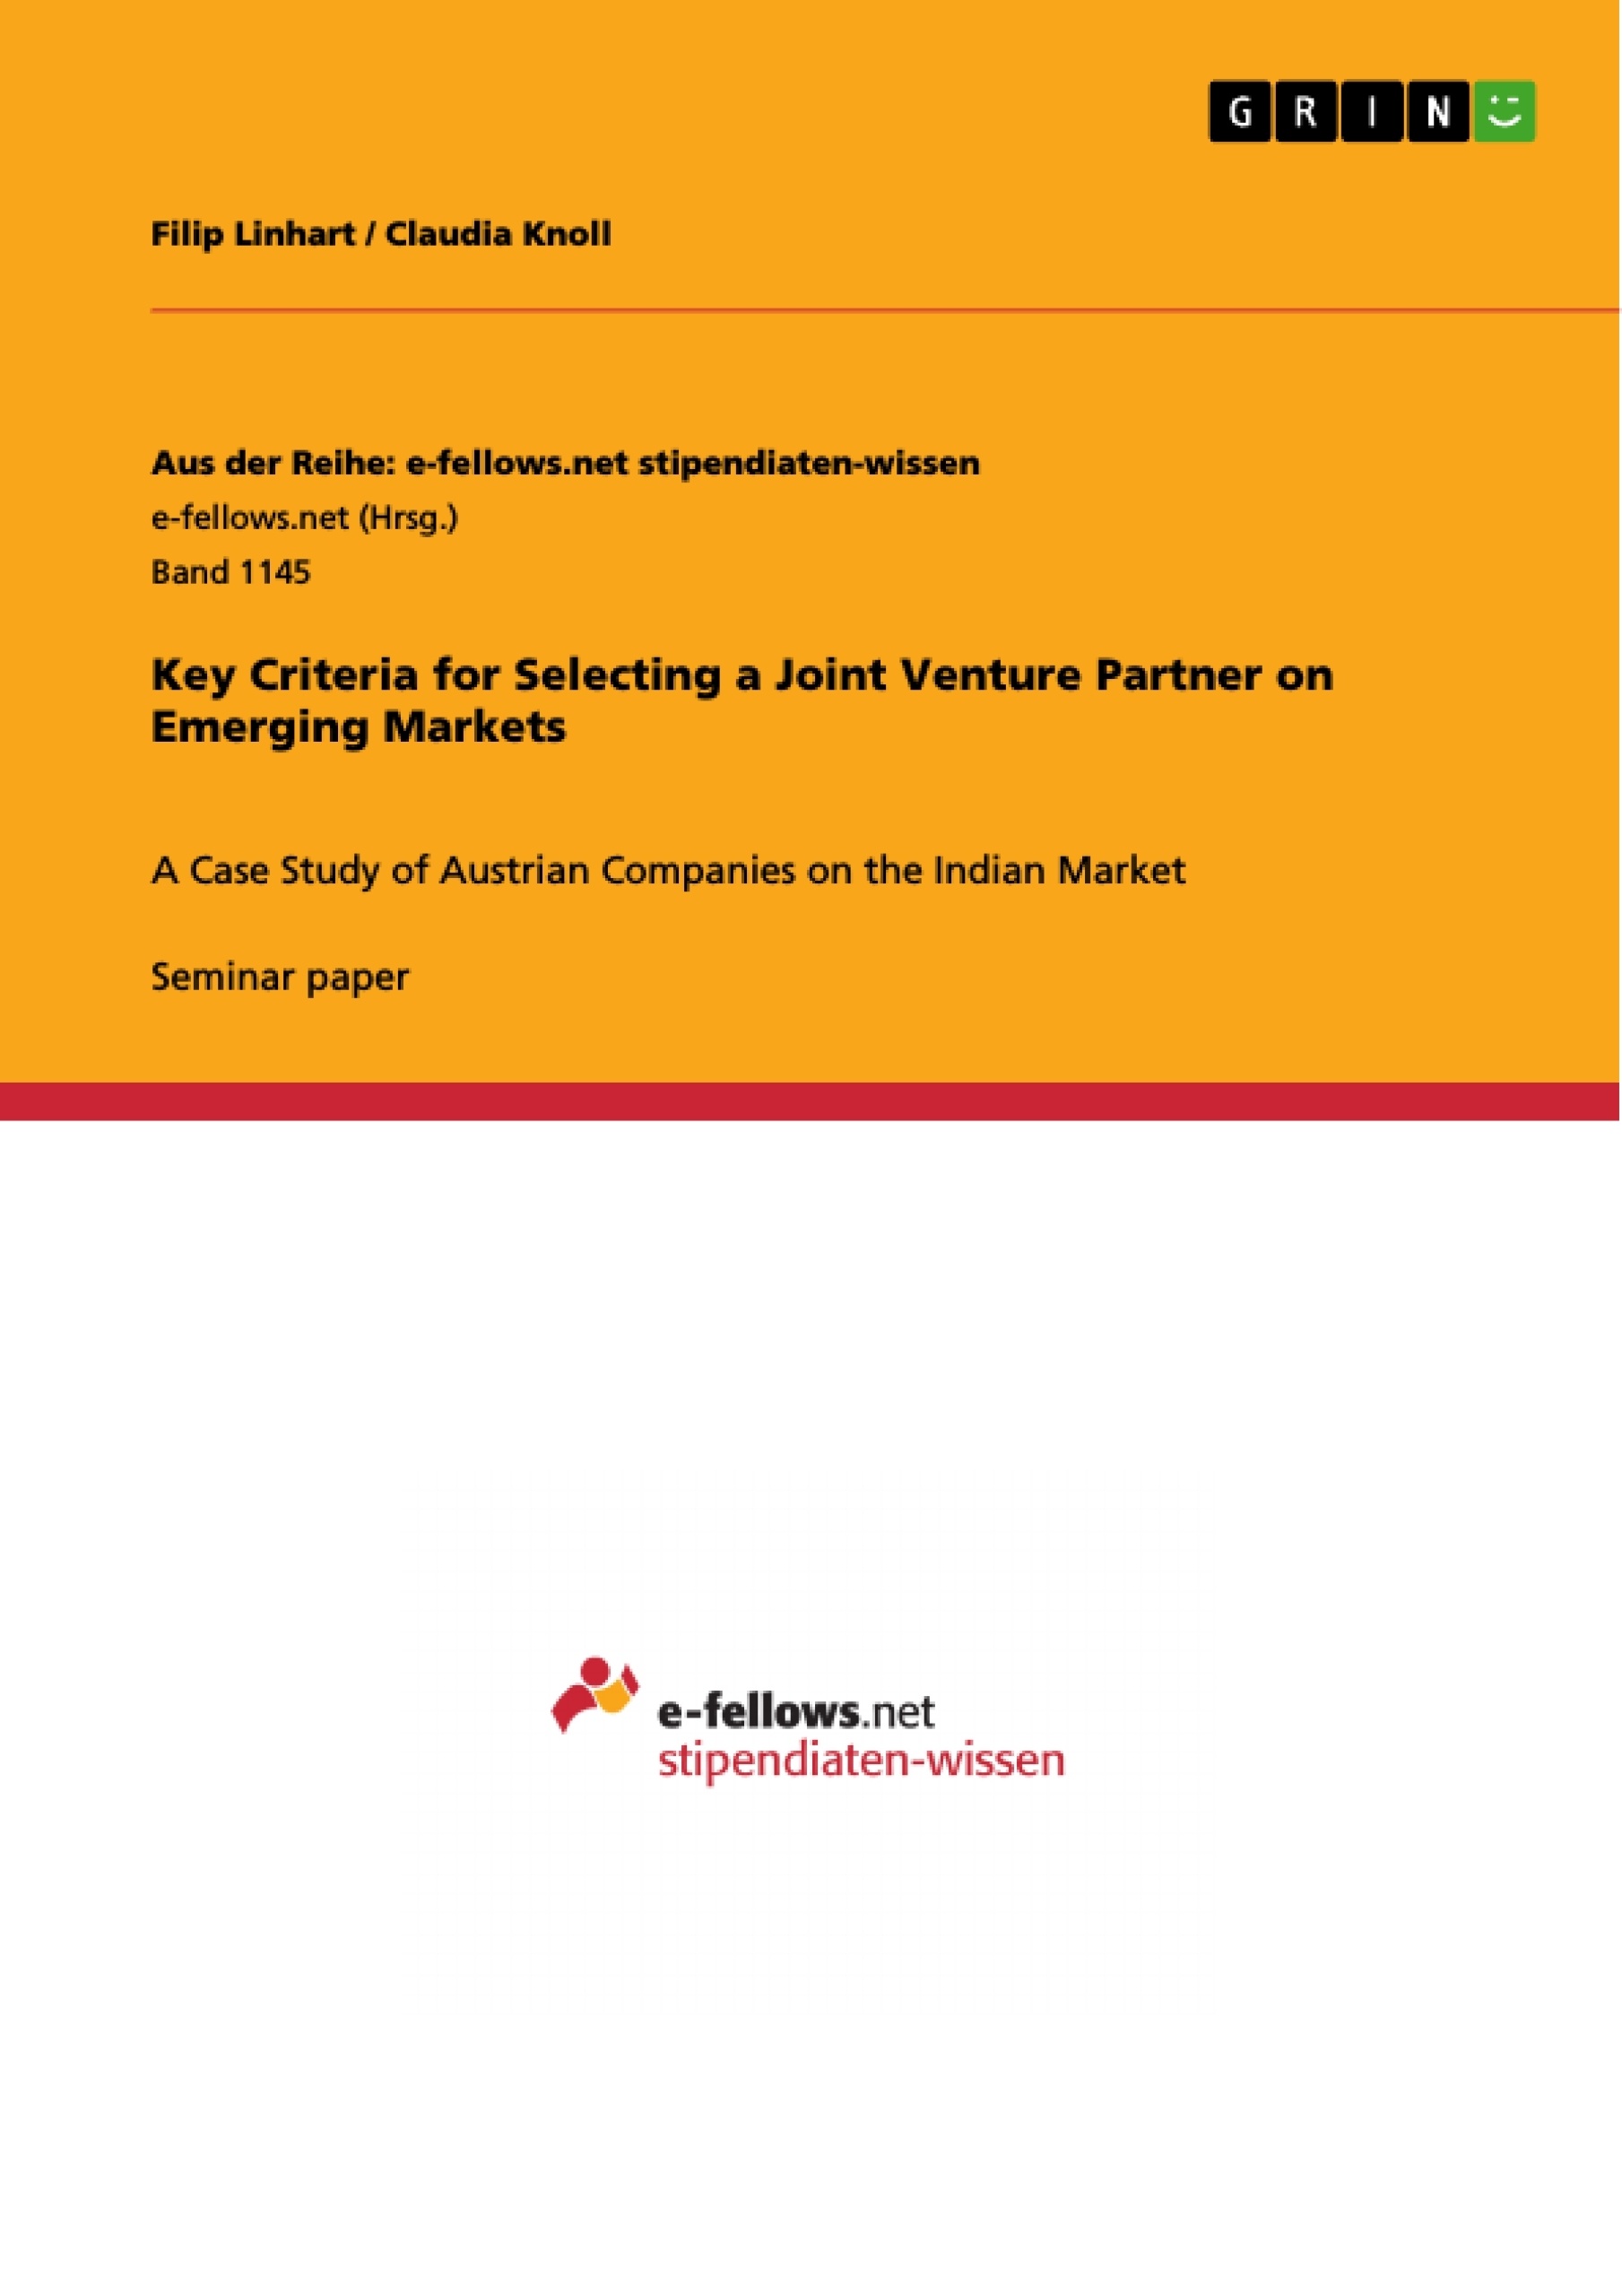 Título: Key Criteria for Selecting a Joint Venture Partner on Emerging Markets